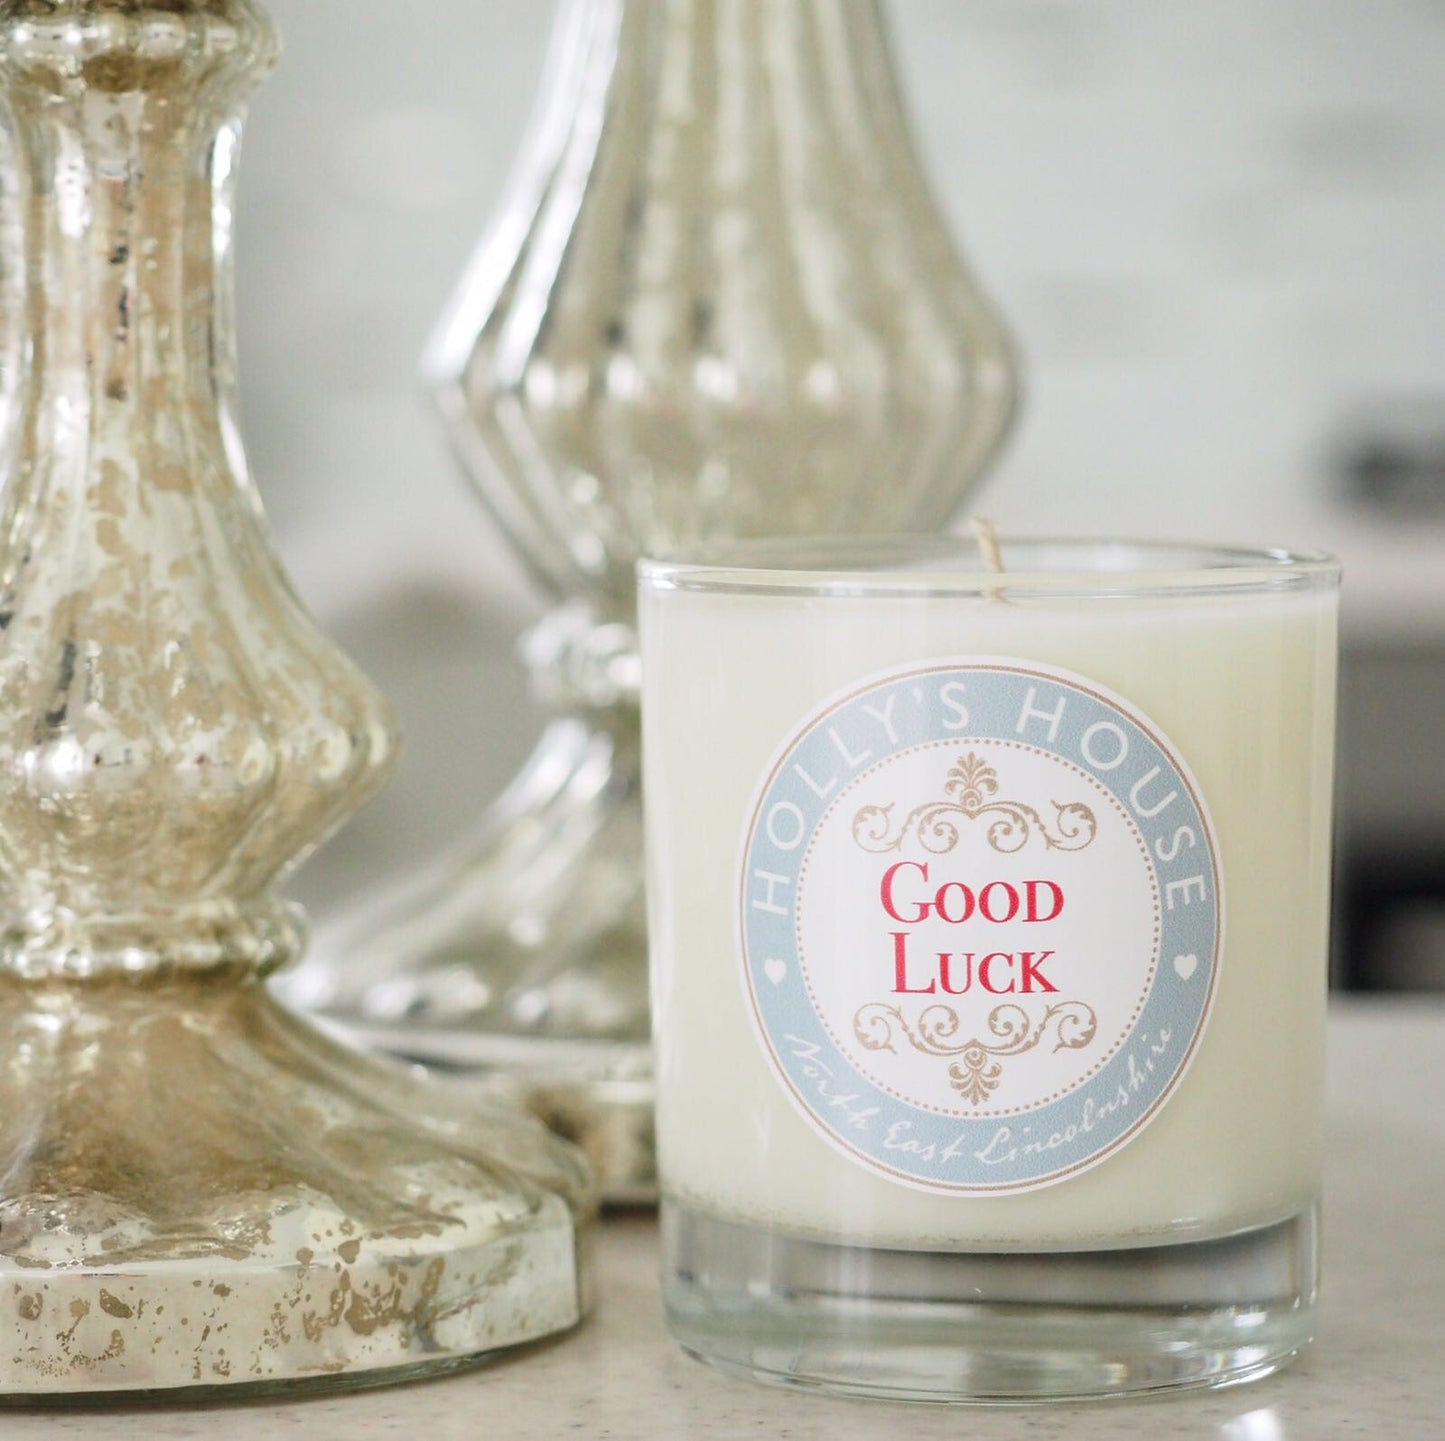 Prosecco & Clementine Luxury Scent Candle